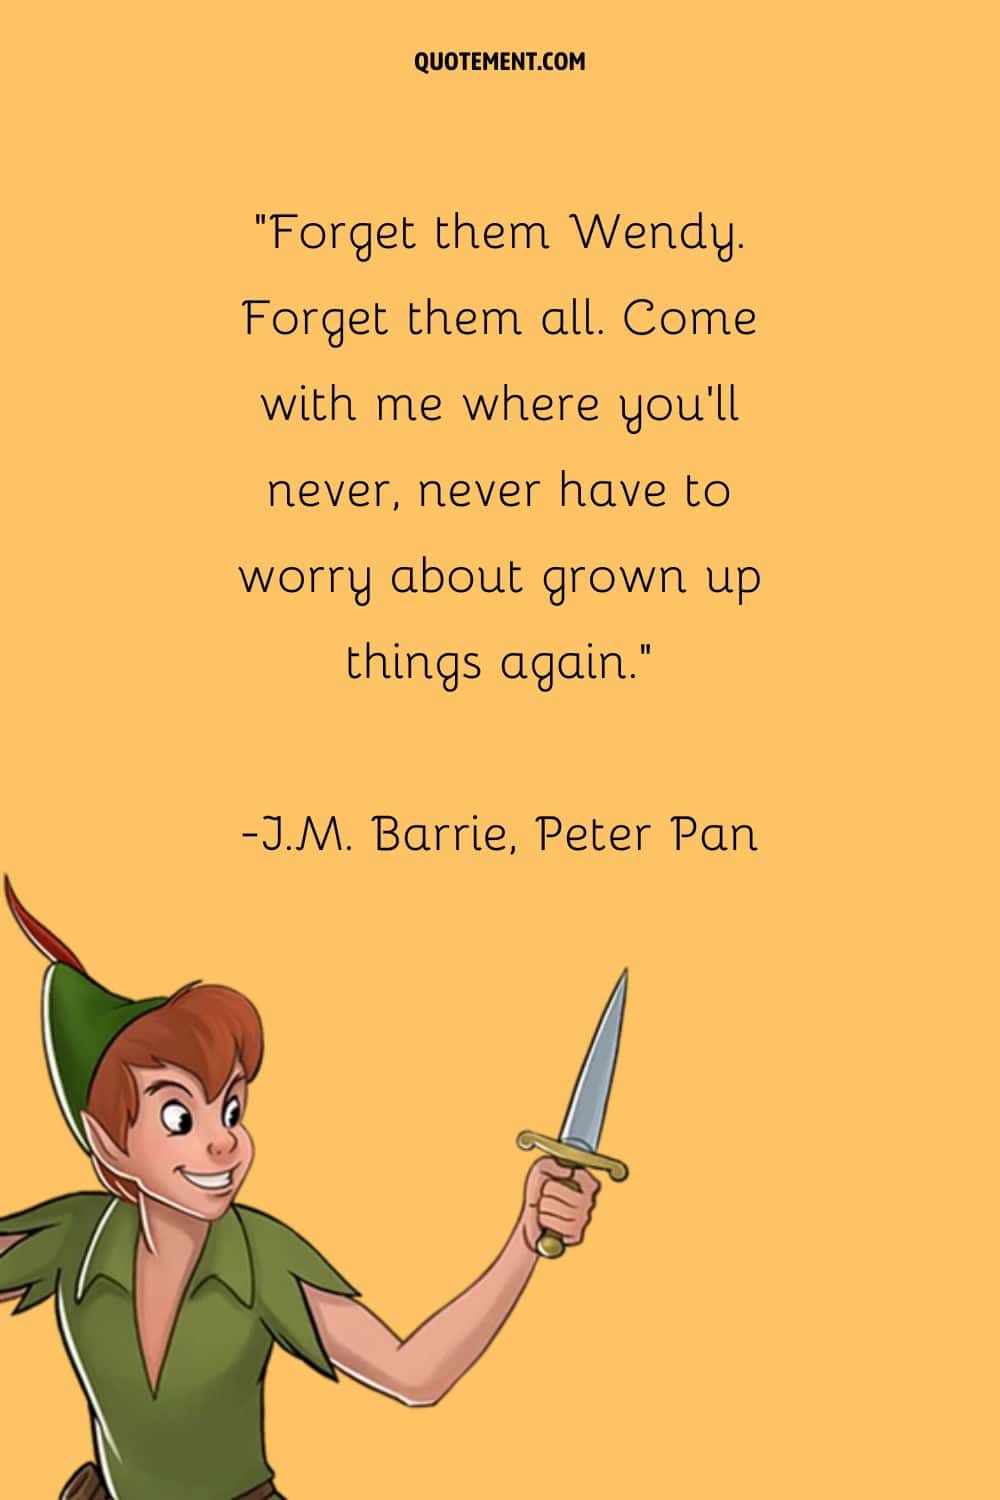 “Forget them Wendy. Forget them all. Come with me where you'll never, never have to worry about grown up things again.” ― J.M. Barrie, Peter Pan